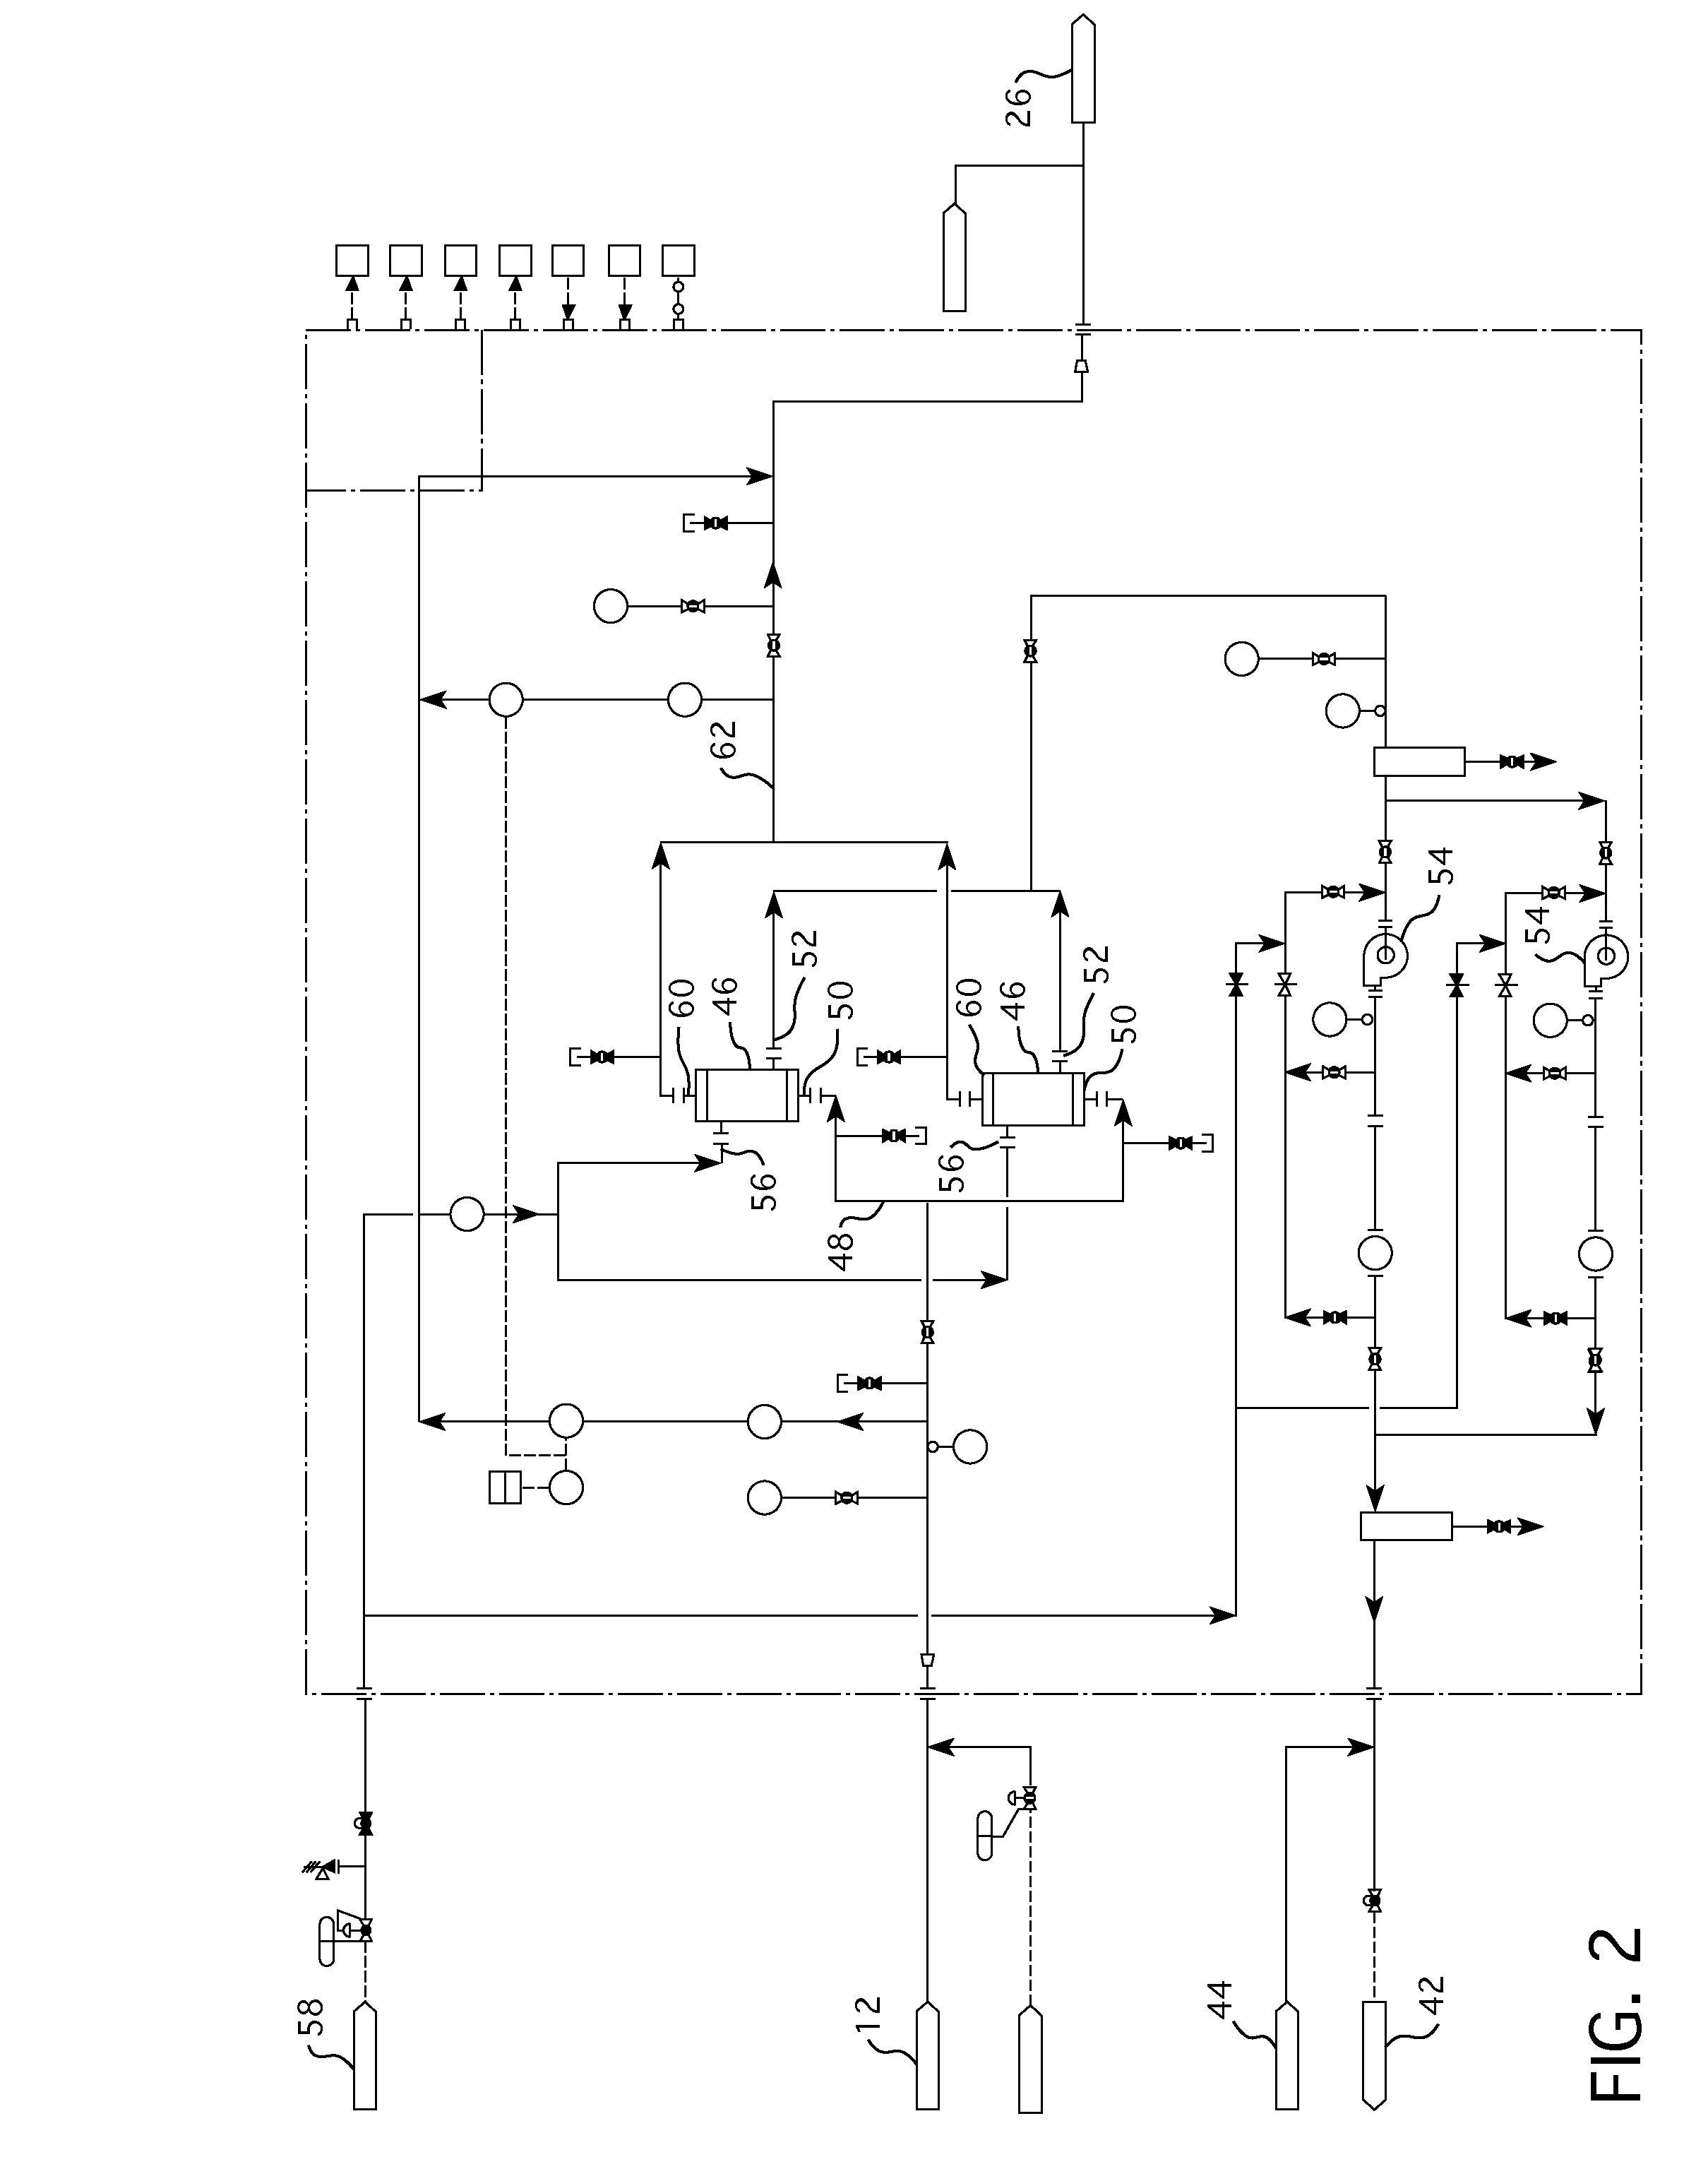 Apparatus for degassing a nuclear reactor coolant system